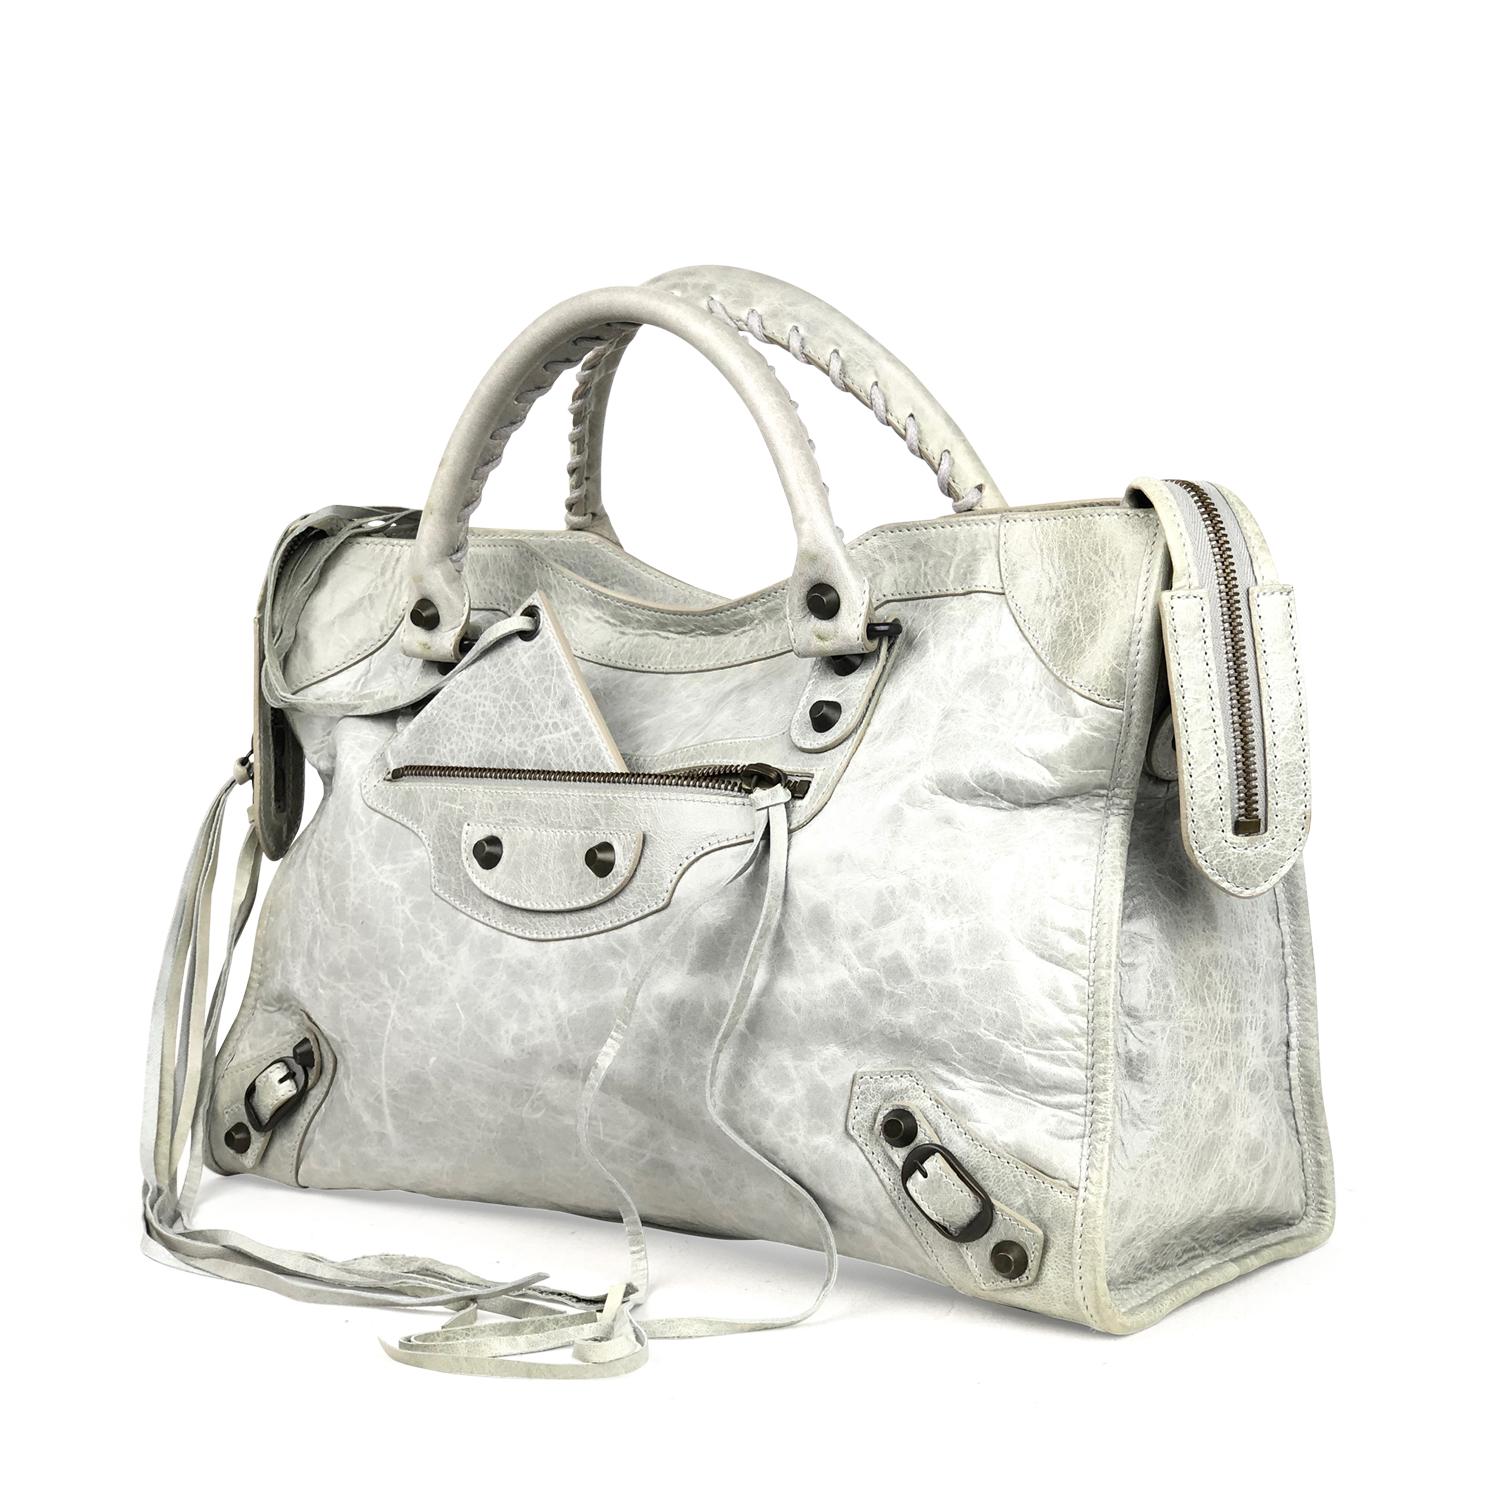 Grey Arena leather Balenciaga Classic City bag with

- Brass hardware
- Dual rolled top handles featuring whipstitch trim
- Detachable flat shoulder strap
- Single zip pocket and stud embellishments featuring buckle adornments at front
- Black woven